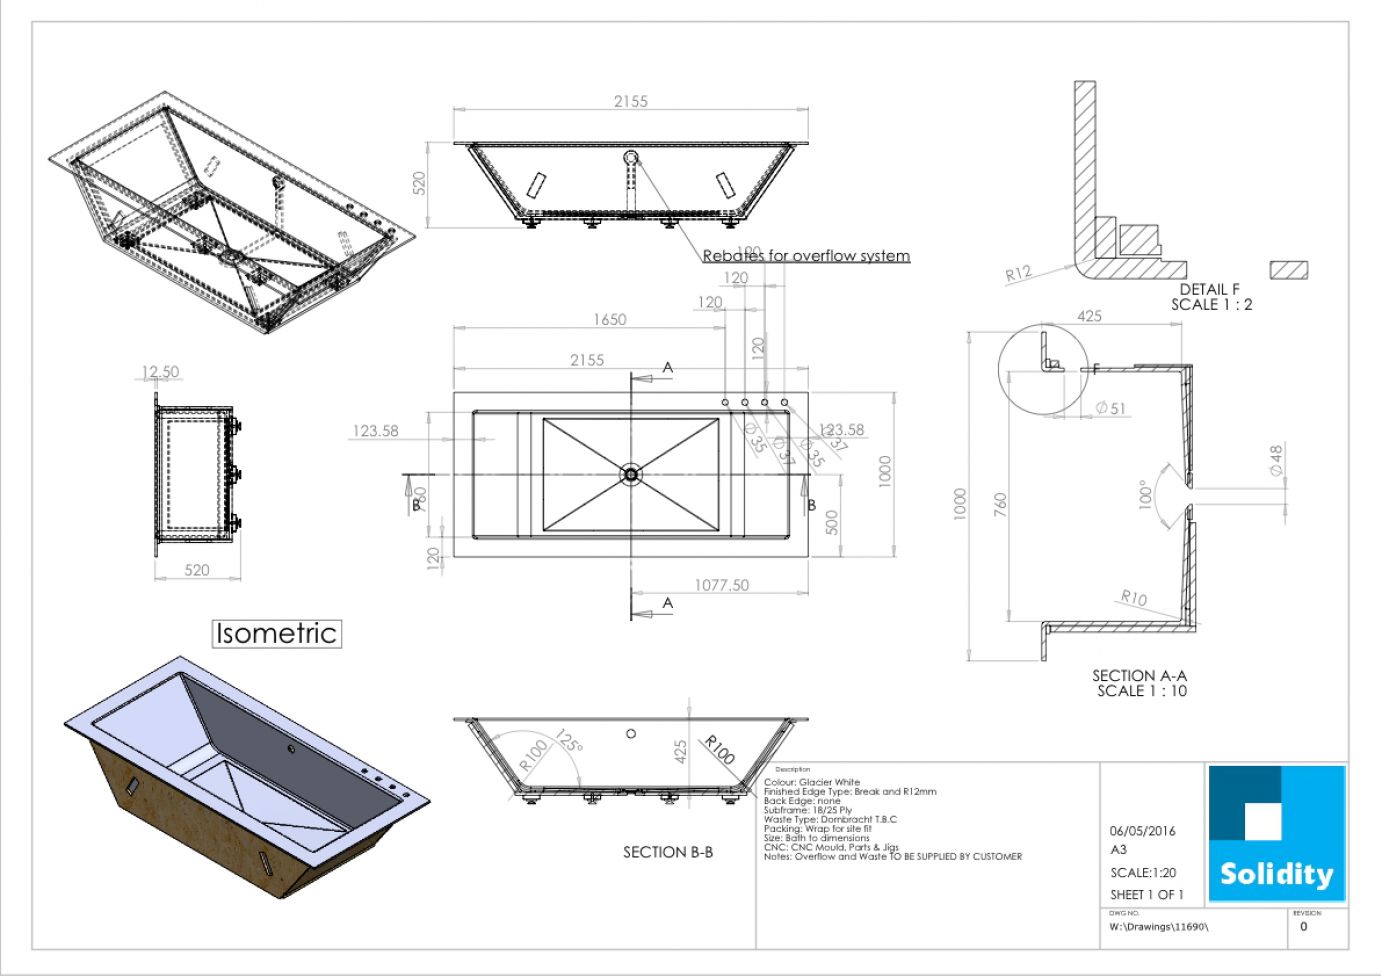 Production drawing